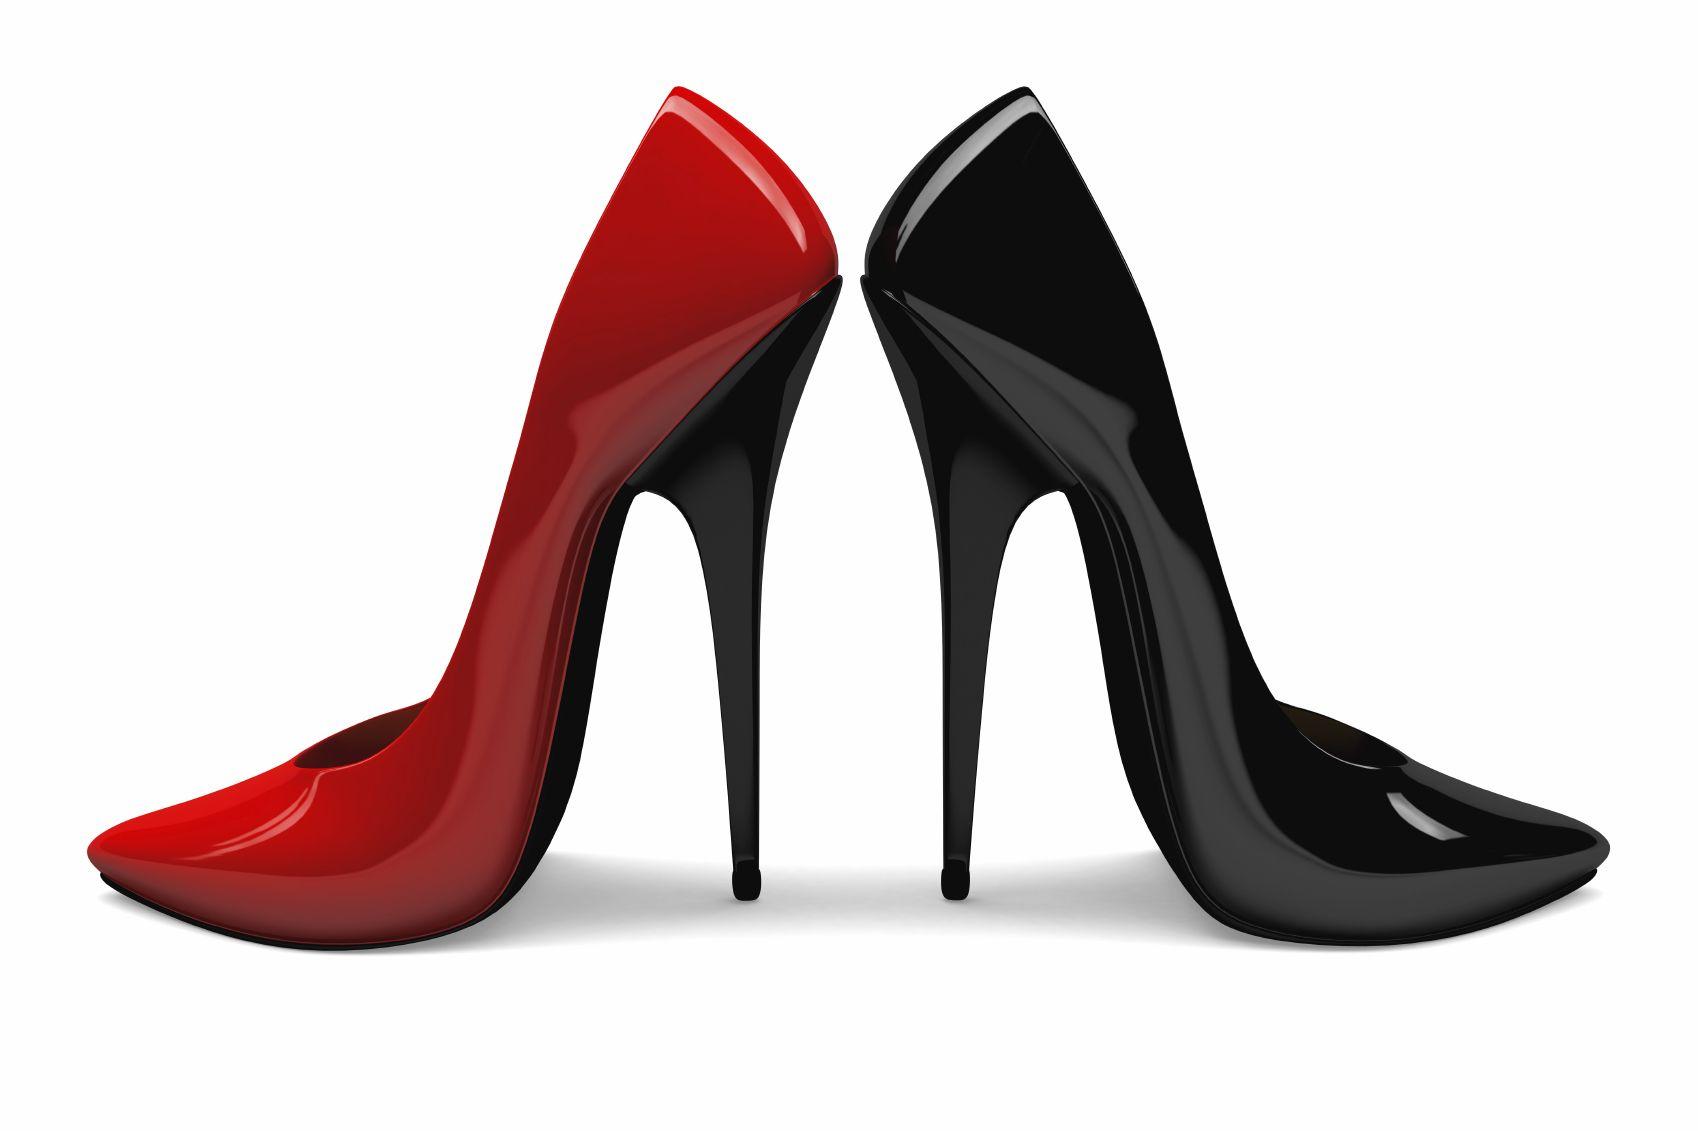 High Heels White Background Image. All White Background